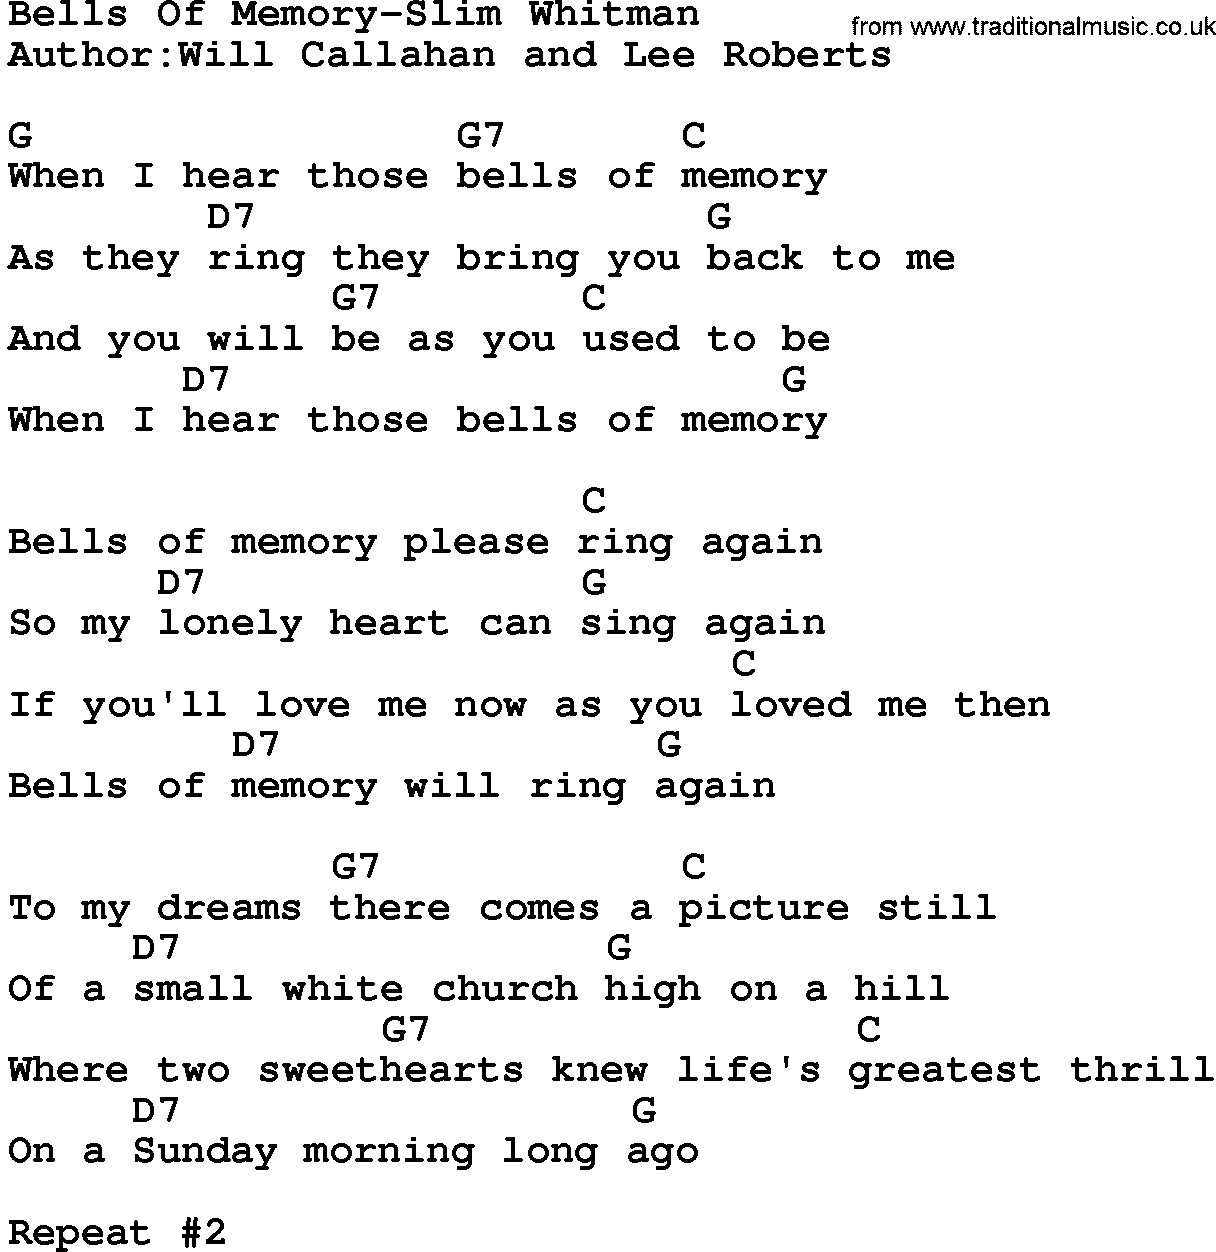 Country music song: Bells Of Memory-Slim Whitman lyrics and chords